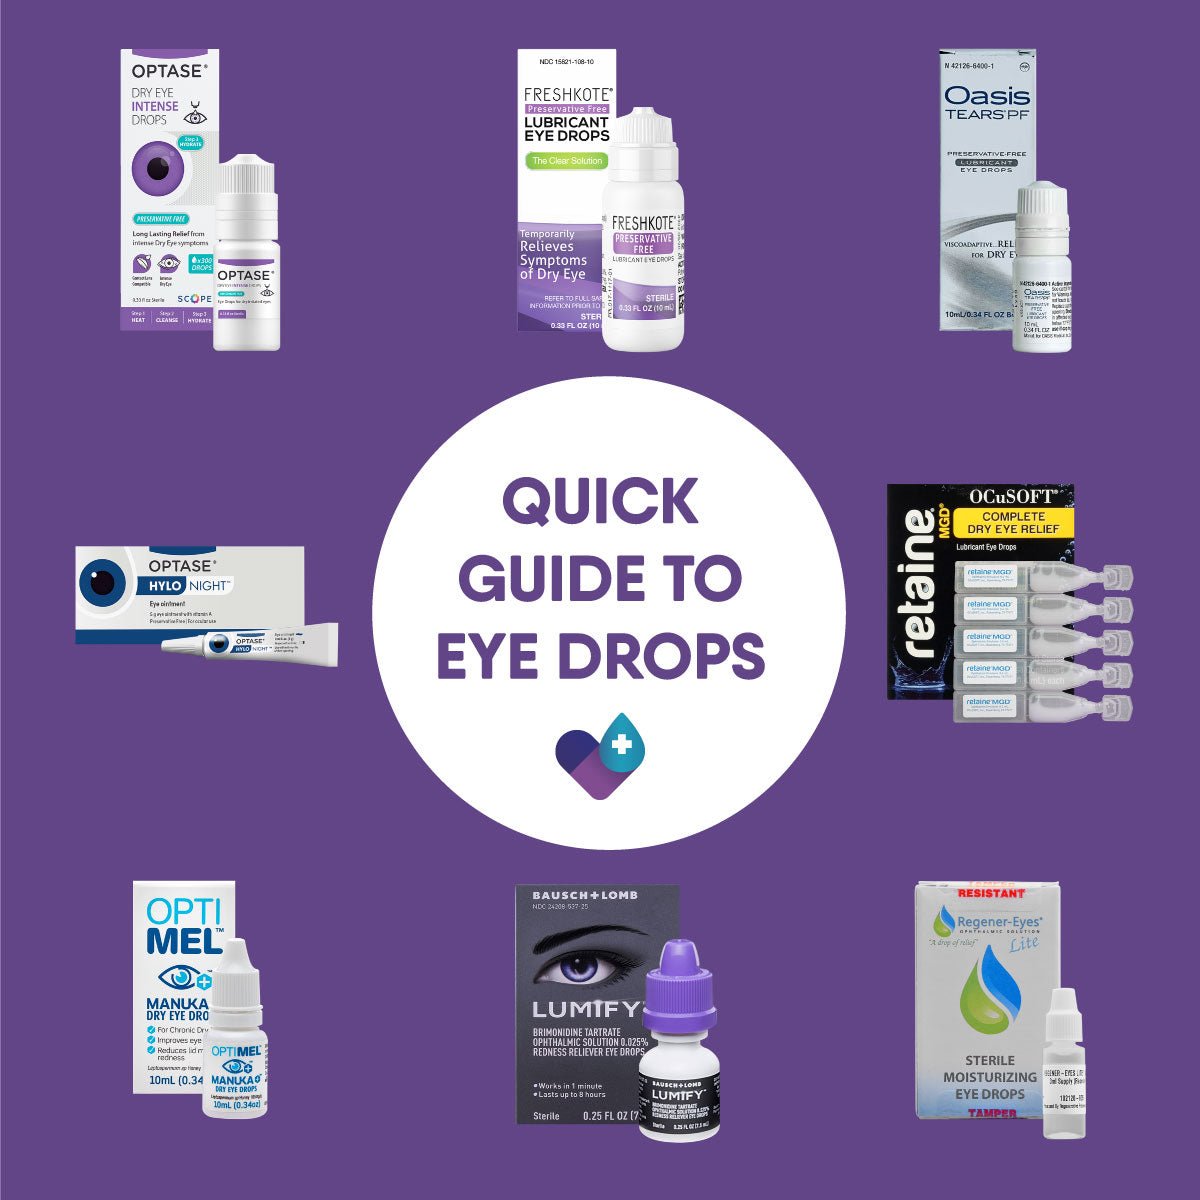 Which eye drop is right for you? - Dryeye Rescue